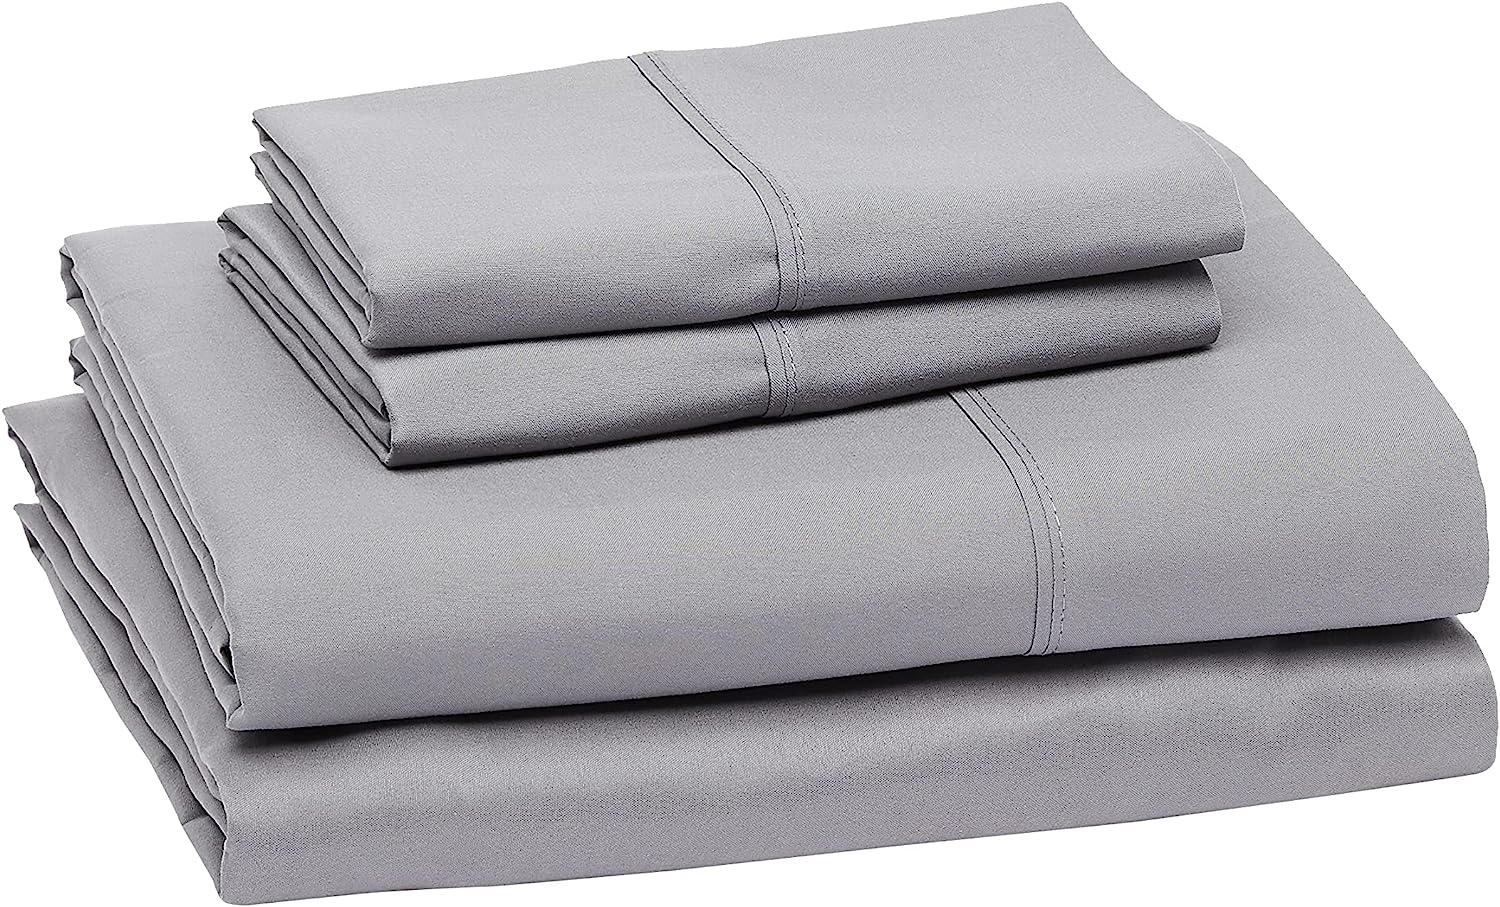 Amazon Basics Lightweight Super Soft Easy Care Microfiber 4-Piece Bed Sheet Set with 14-Inch Deep Pockets, Queen, Beige, Solid